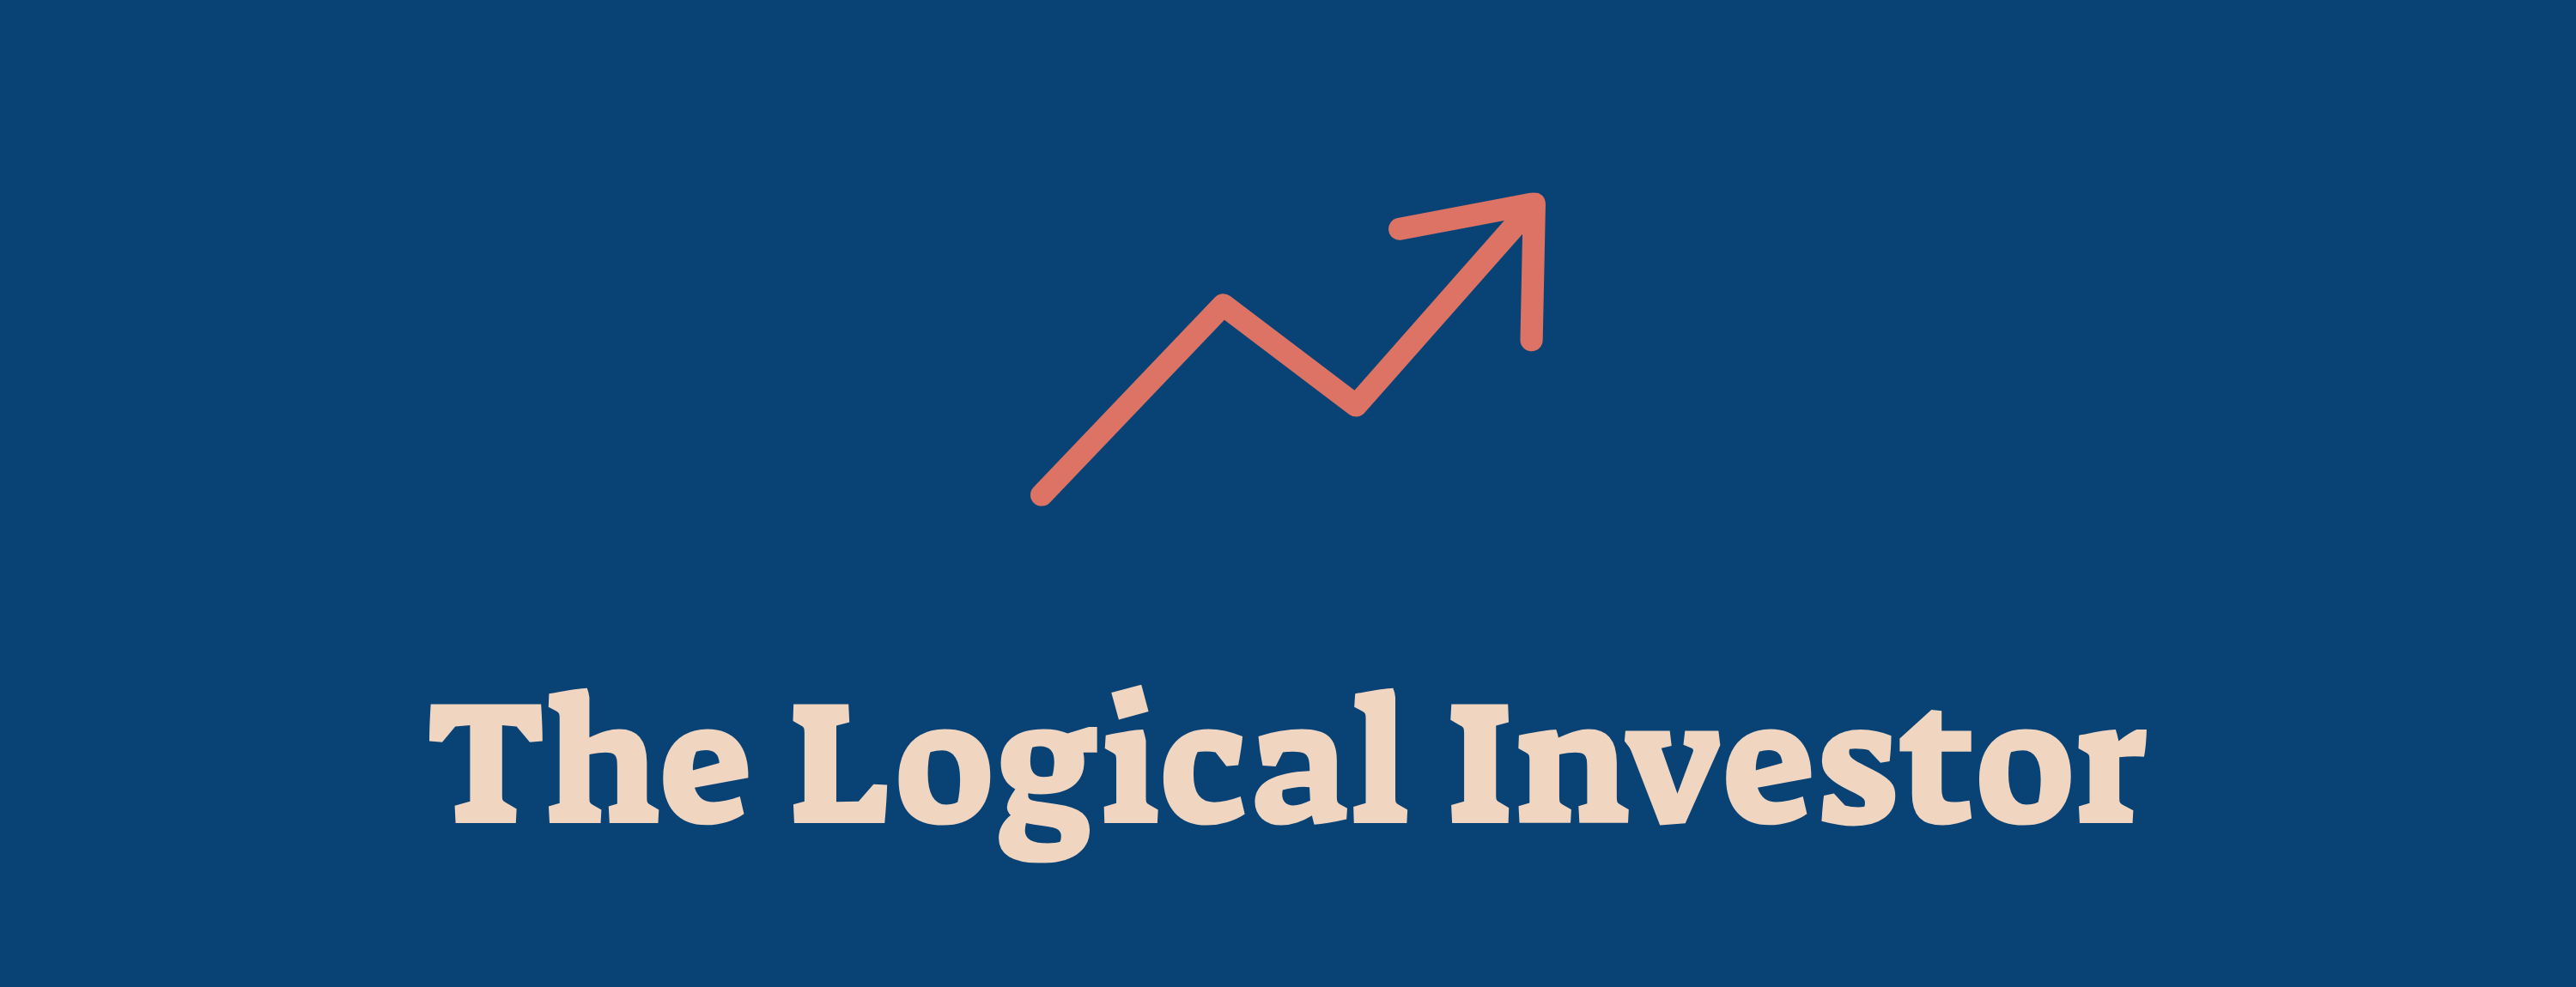 The Logical Investor